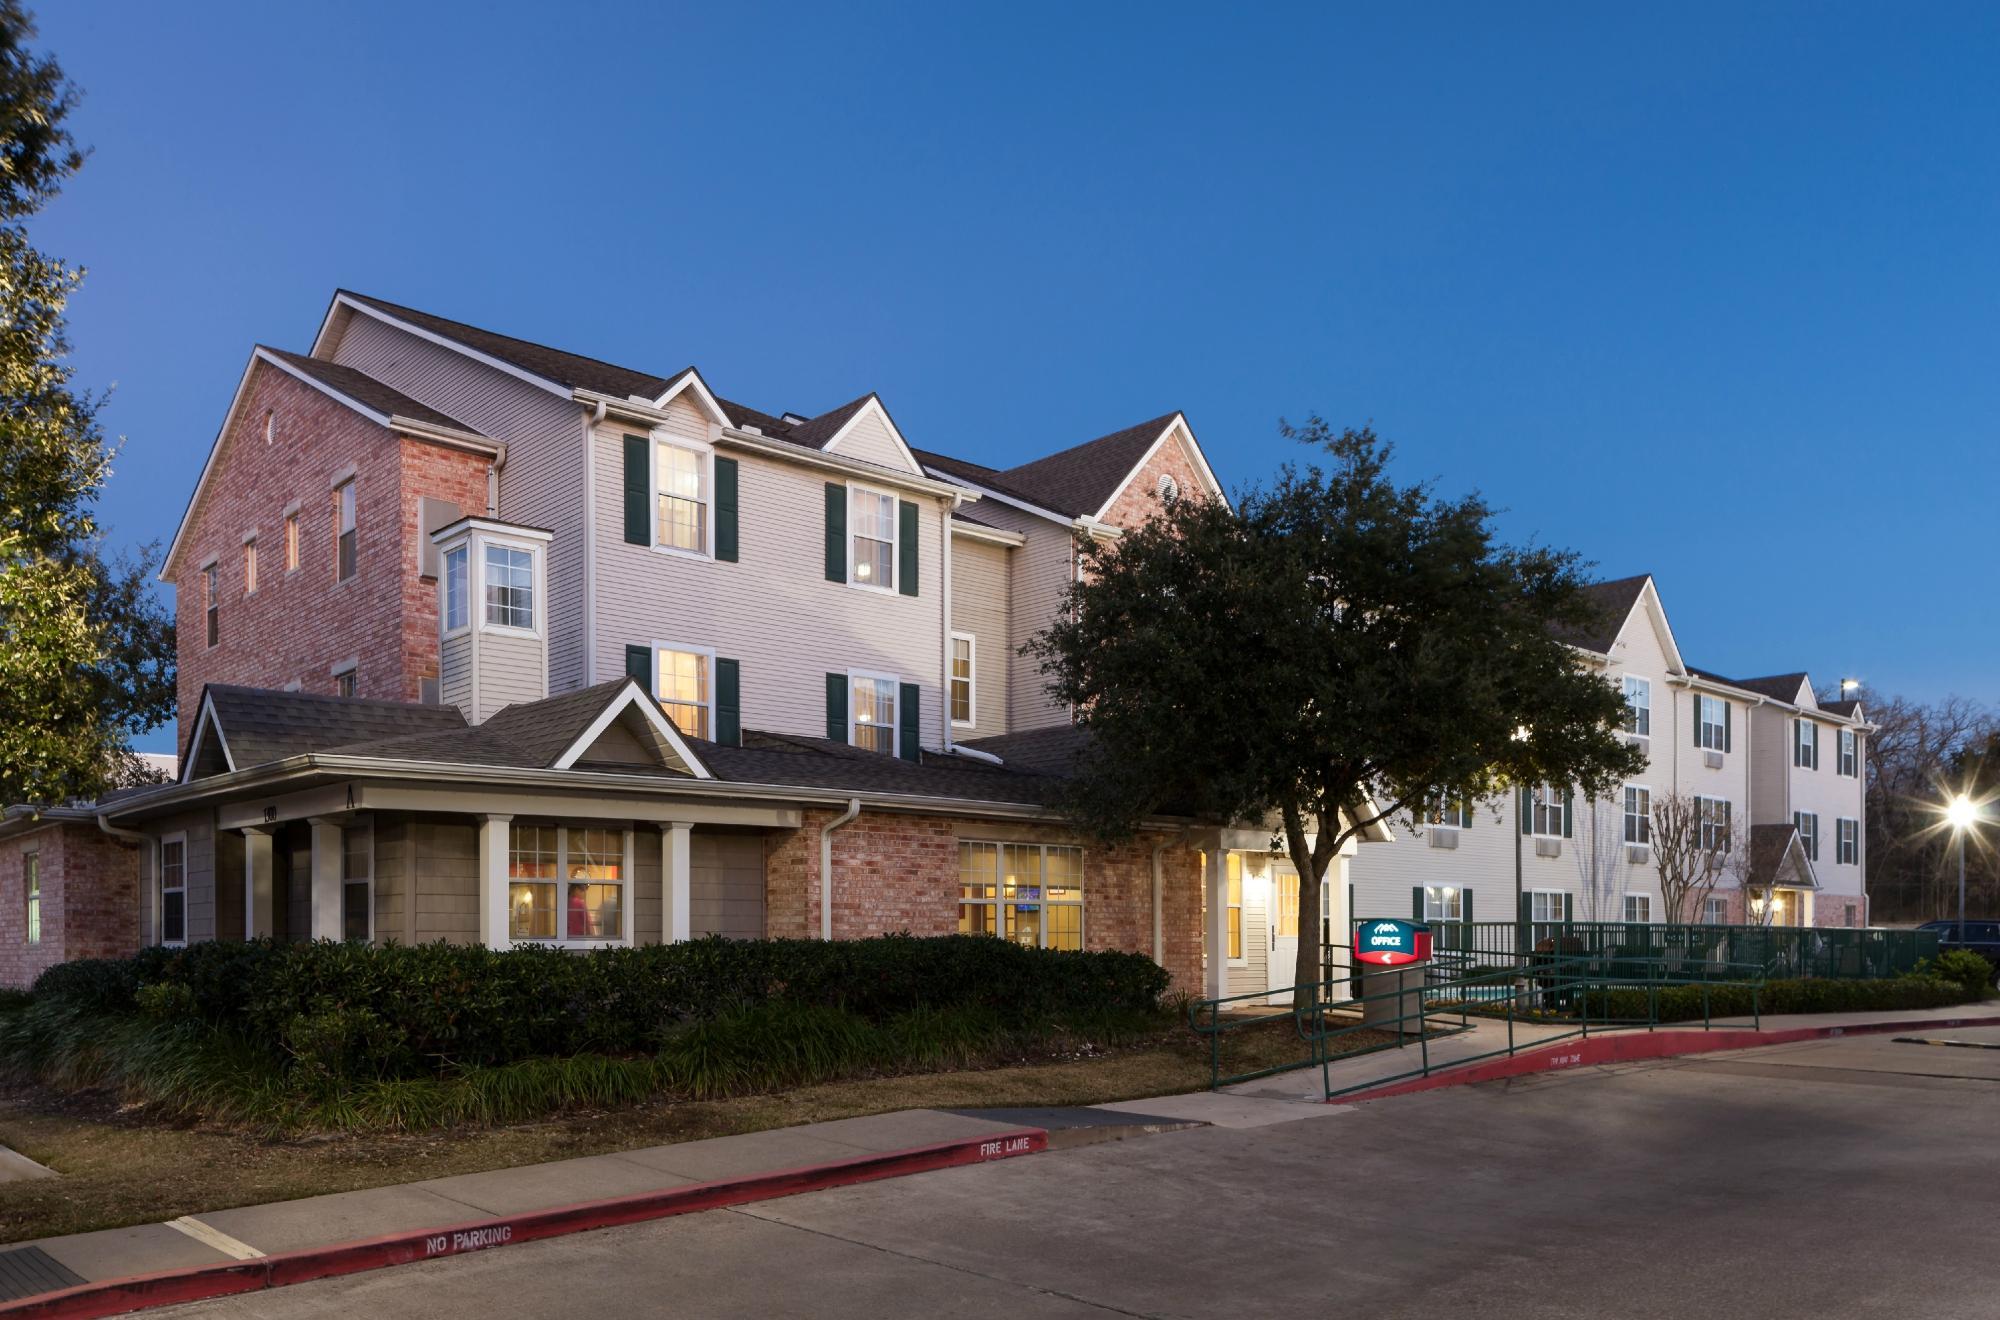 Photo of TownePlace Suites Bryan College Station, College Station, TX